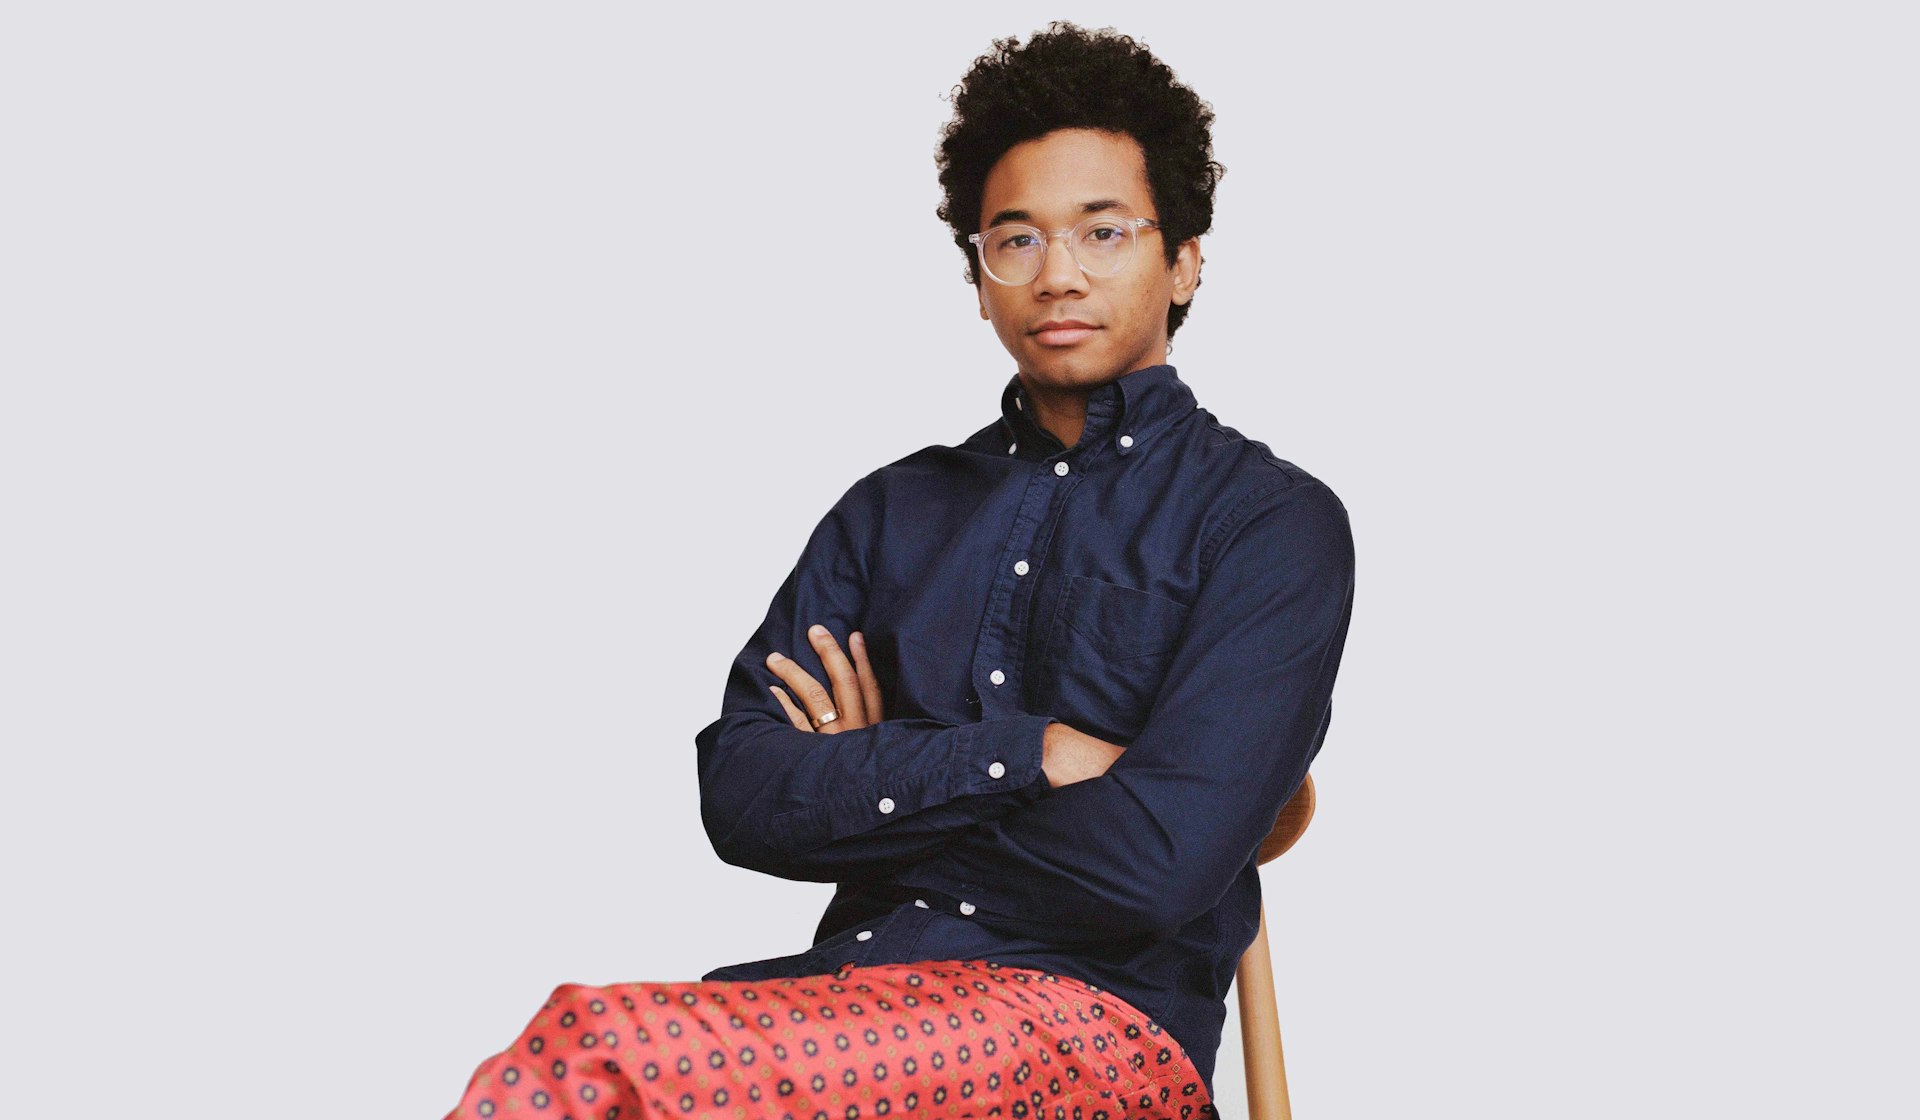 For Toro y Moi, flipping burgers can make dreams come true